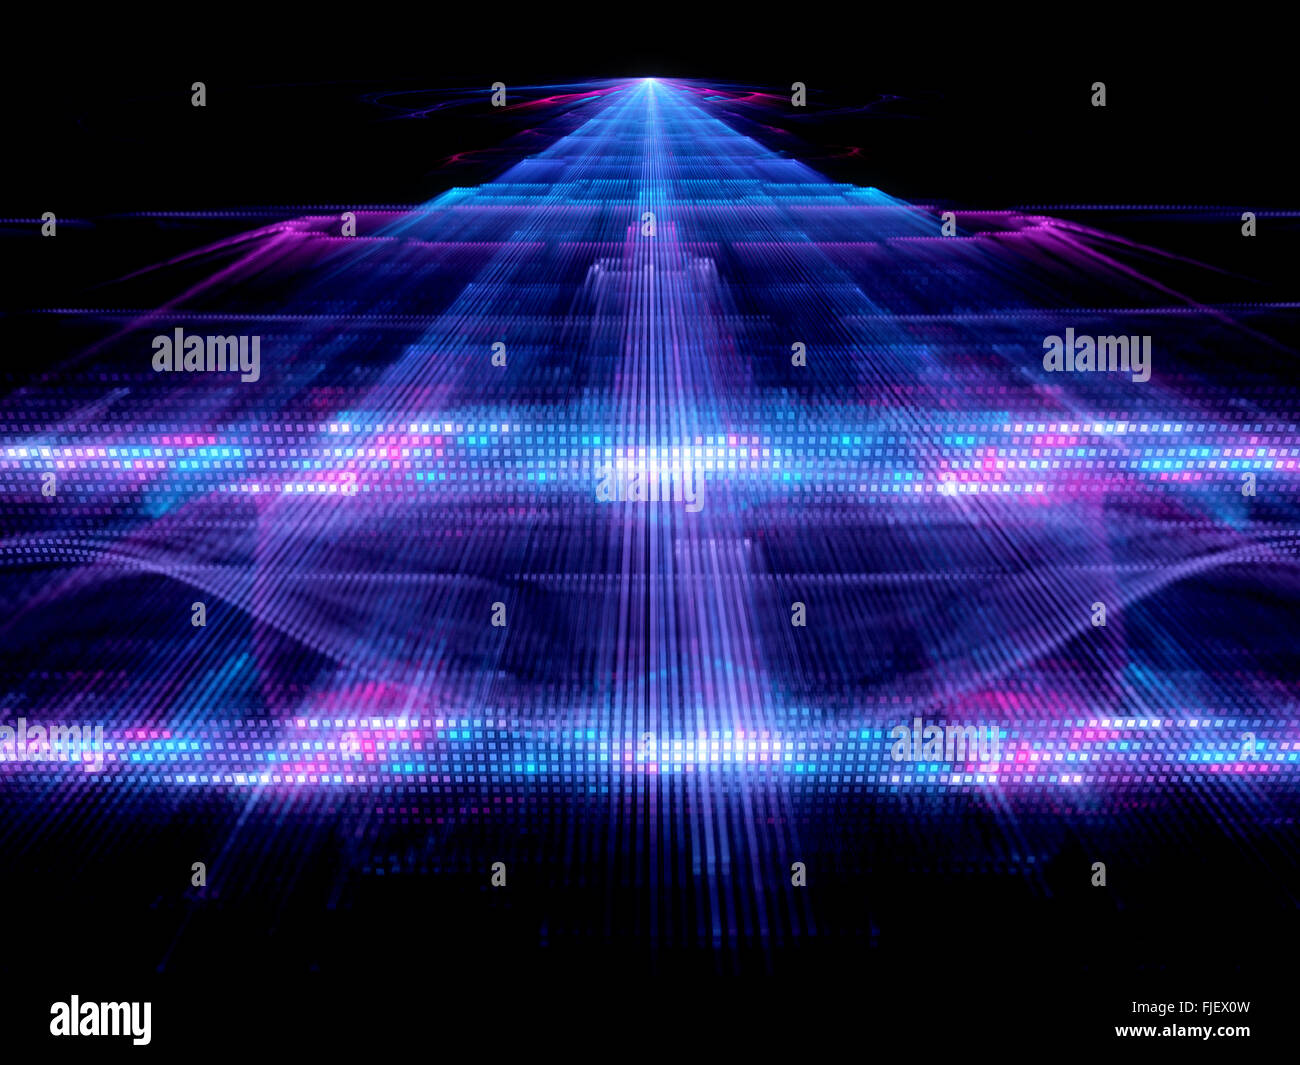 Multilevel big data analysis or quantum computer, generated abstract background Stock Photo